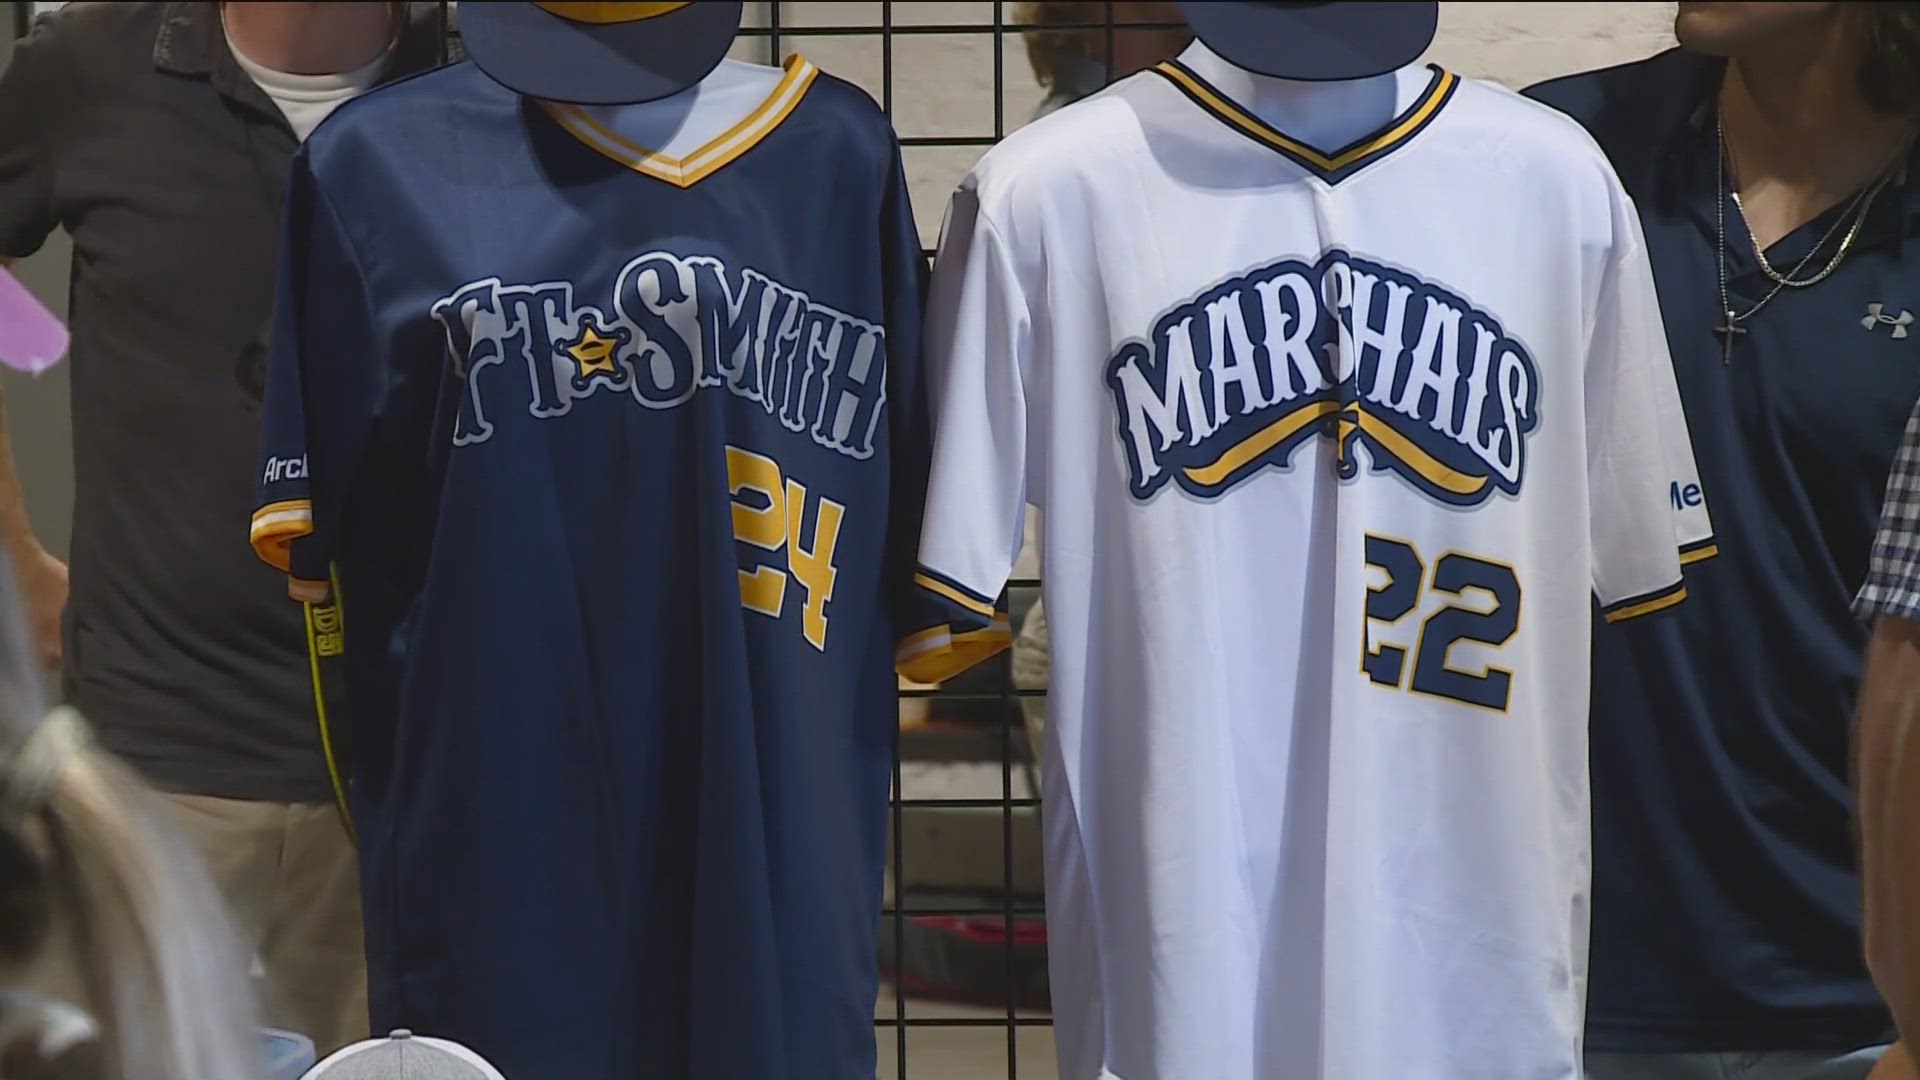 The new team will face the Texarkana Rhinos for a four-game series starting May 23.